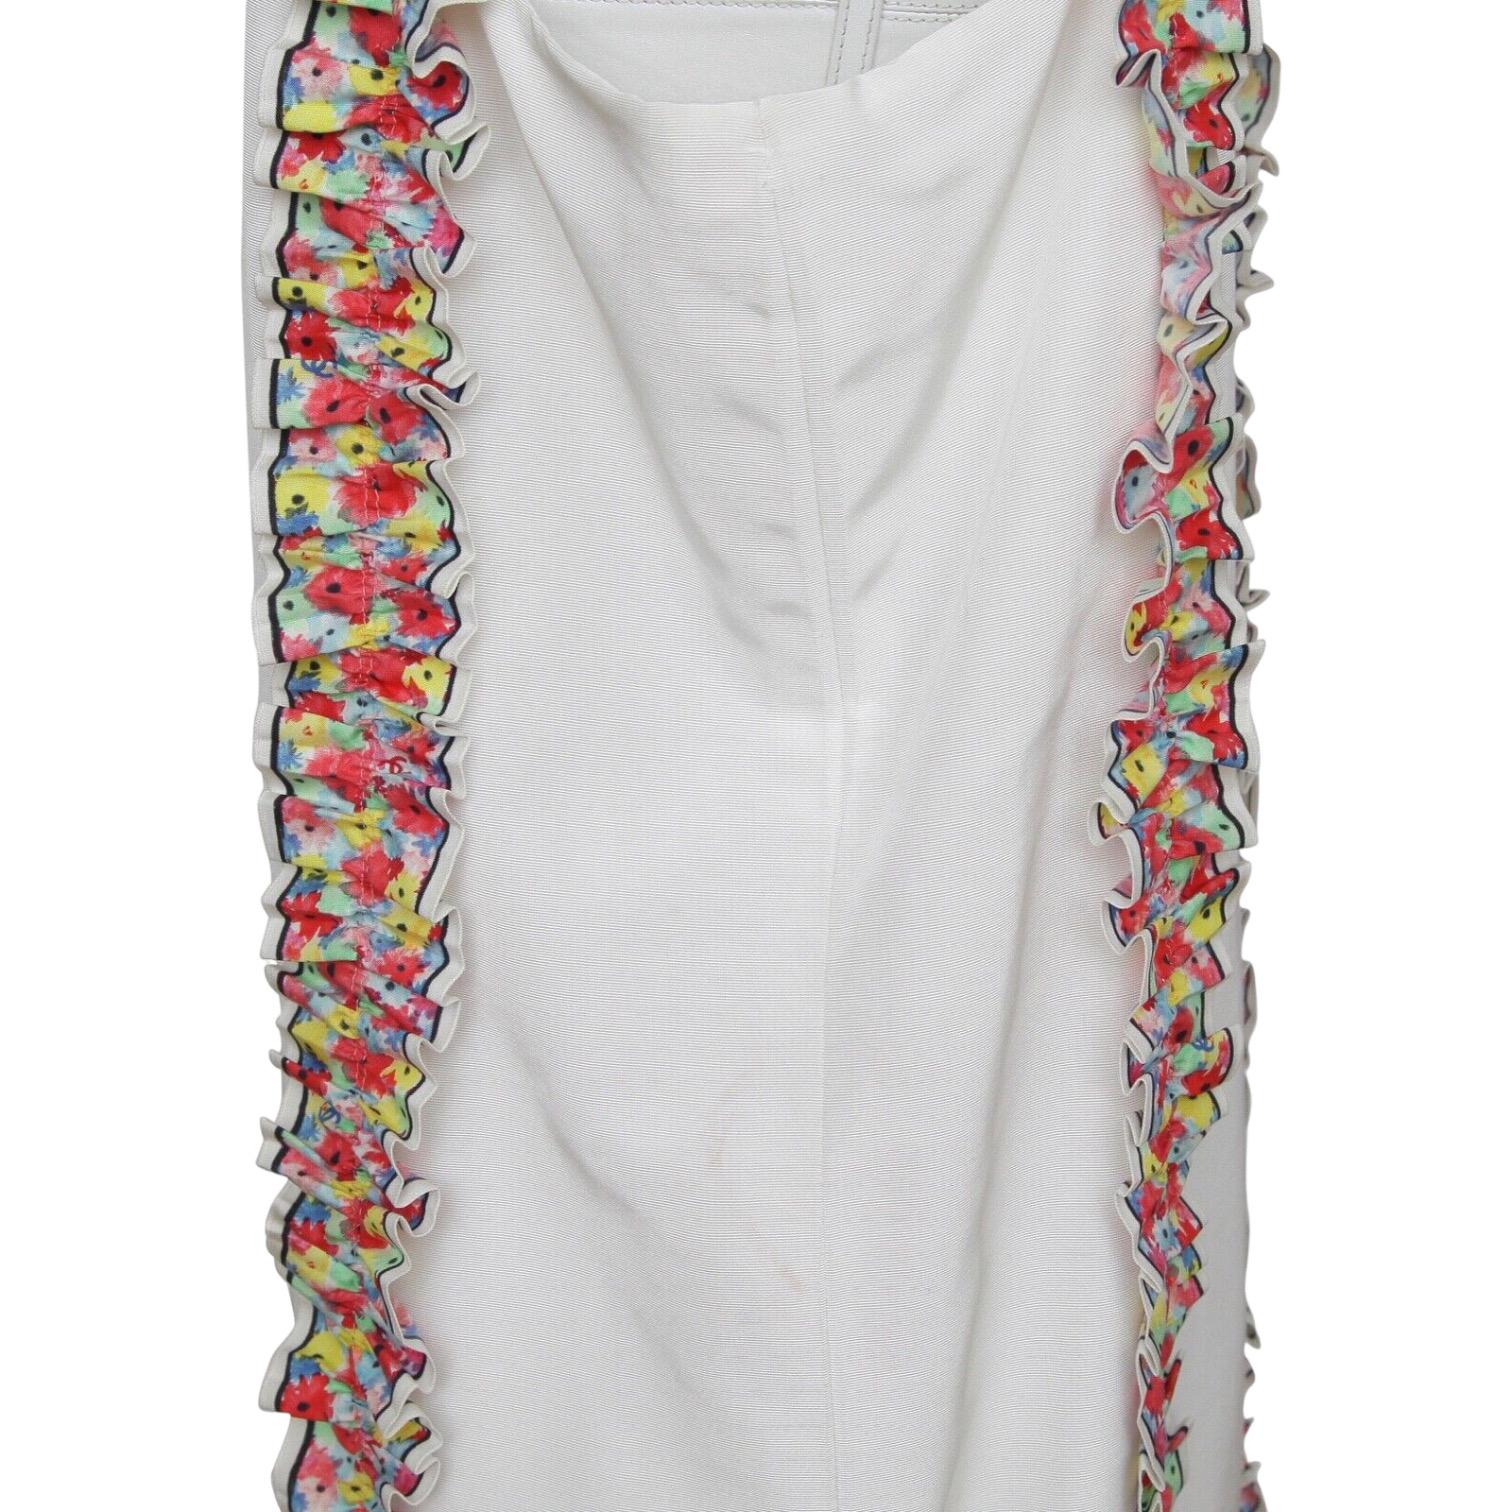 CHANEL Dress White Sleeveless Multicolor Floral Silver HW Collar 42 RUNWAY 2016 3